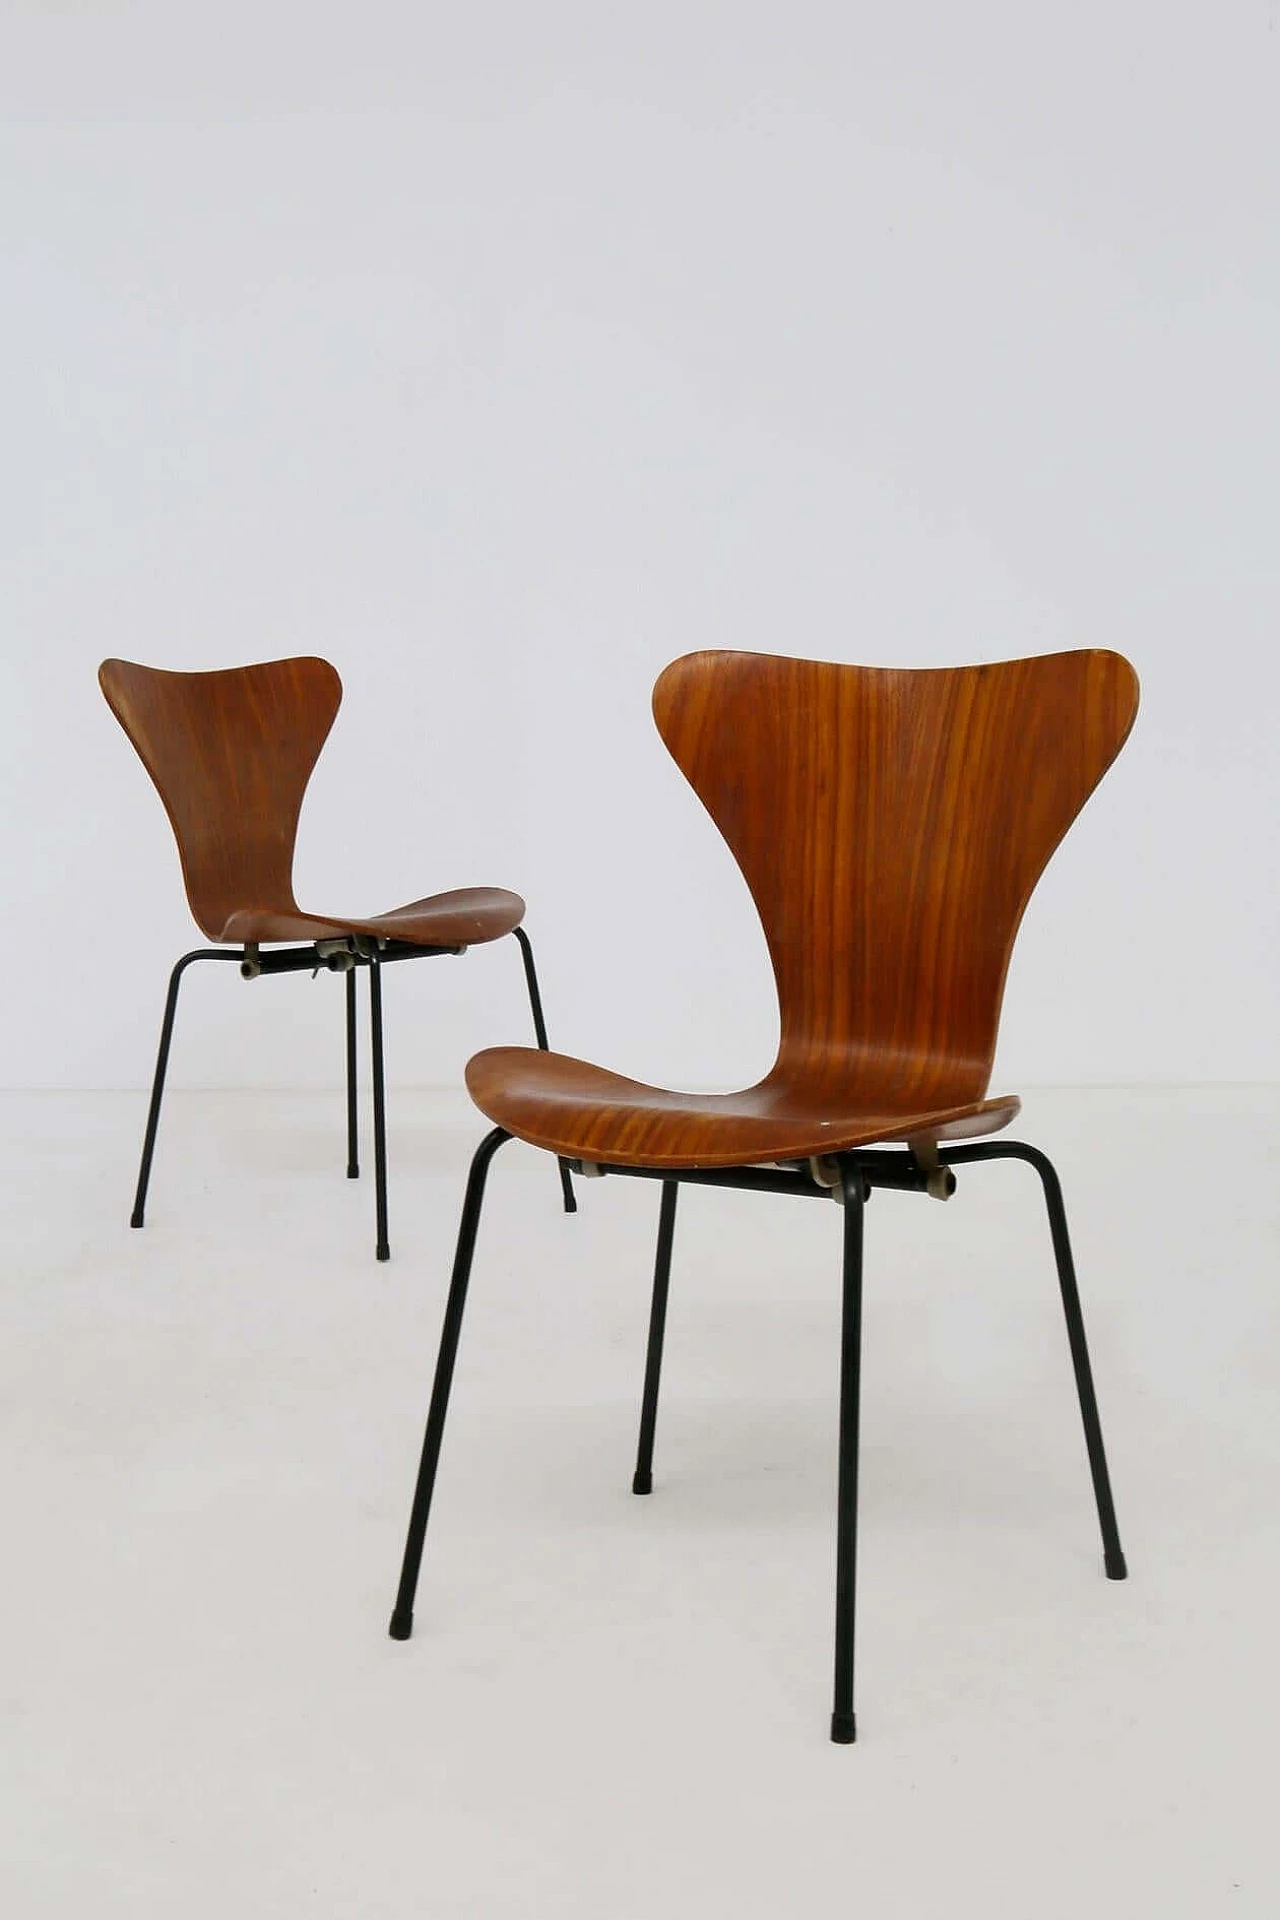 6 Chairs by Arne Jacobsen model Butterfly for the Brazilian airline Varig, 1950s 1387805